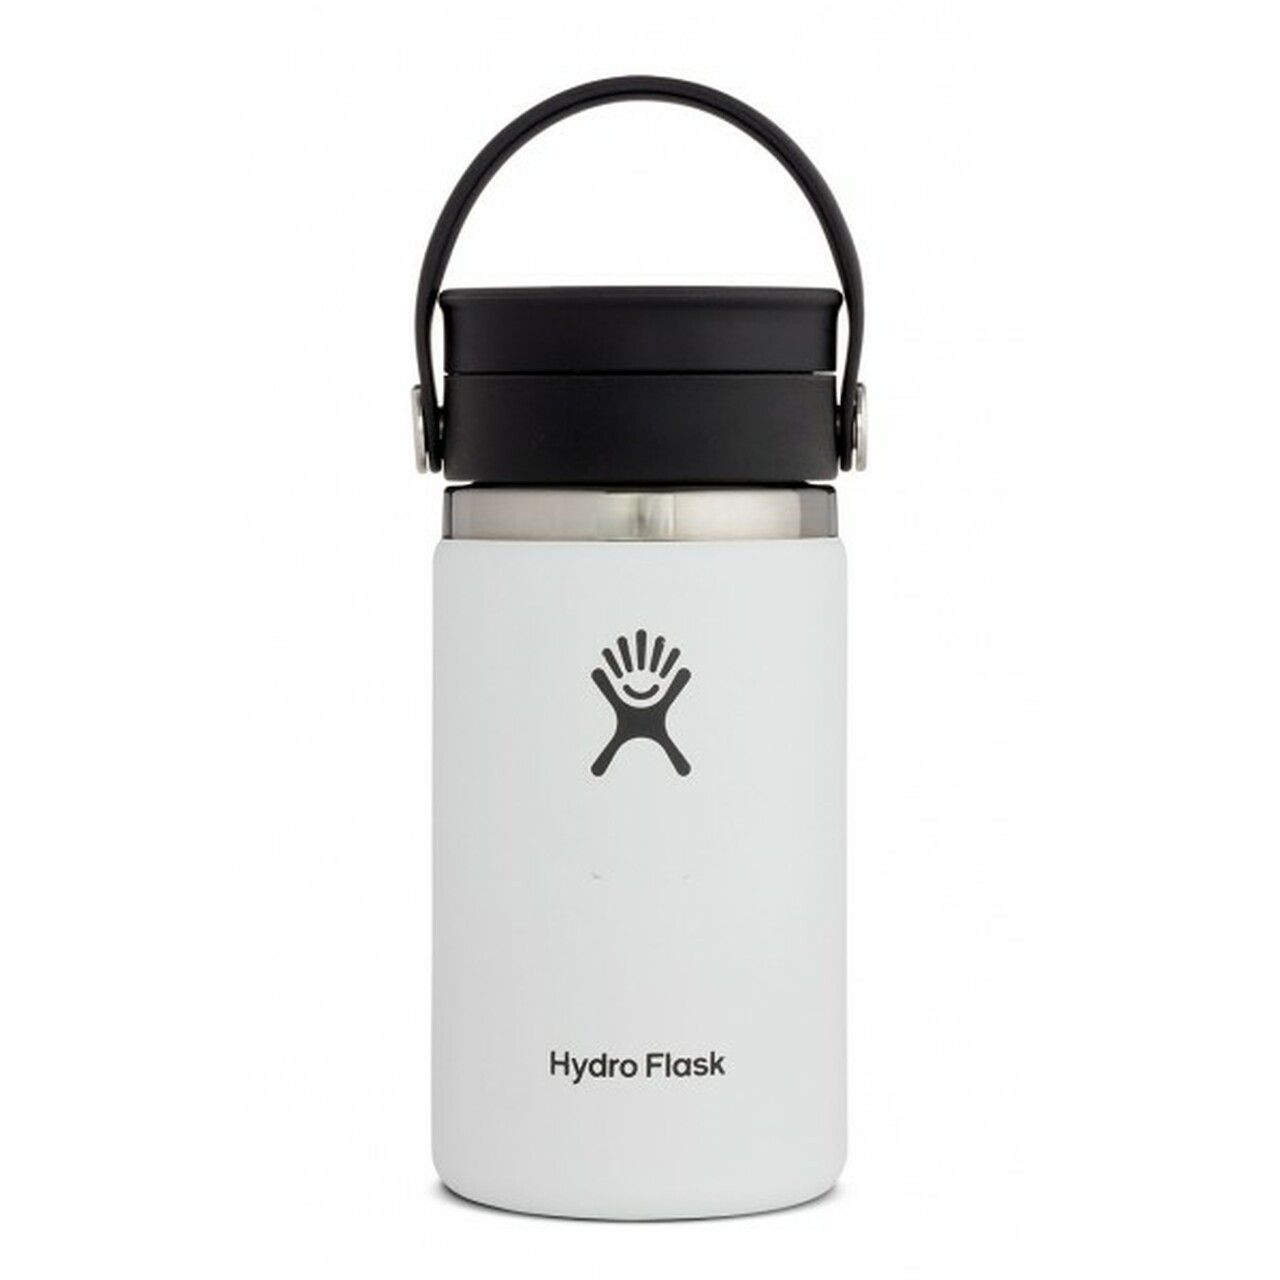 https://cdn11.bigcommerce.com/s-p4e2op94ll/images/stencil/1280x1280/products/2890/15762/Hydroflask_12_ounce_coffee_cup_with_flex_sip_lid_white__69404.1683585698.jpg?c=2?imbypass=on